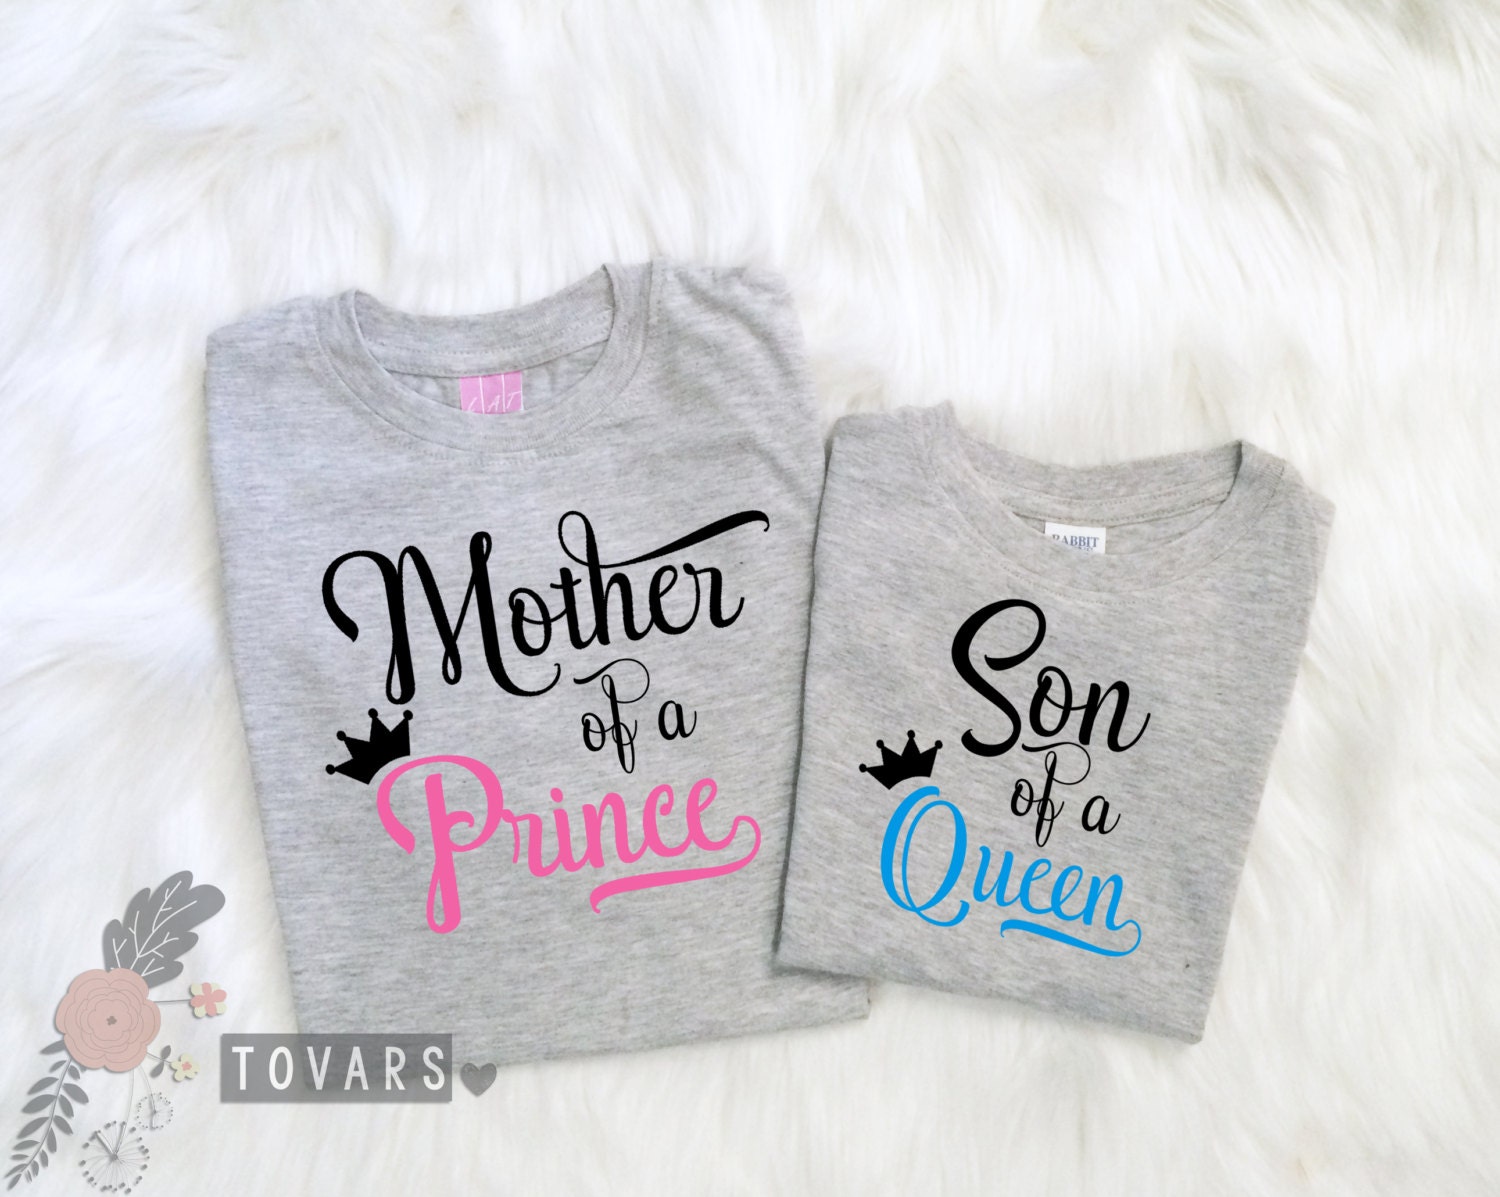 Download Mother of a Prince and Son of a Queen Matching Shirts Matching